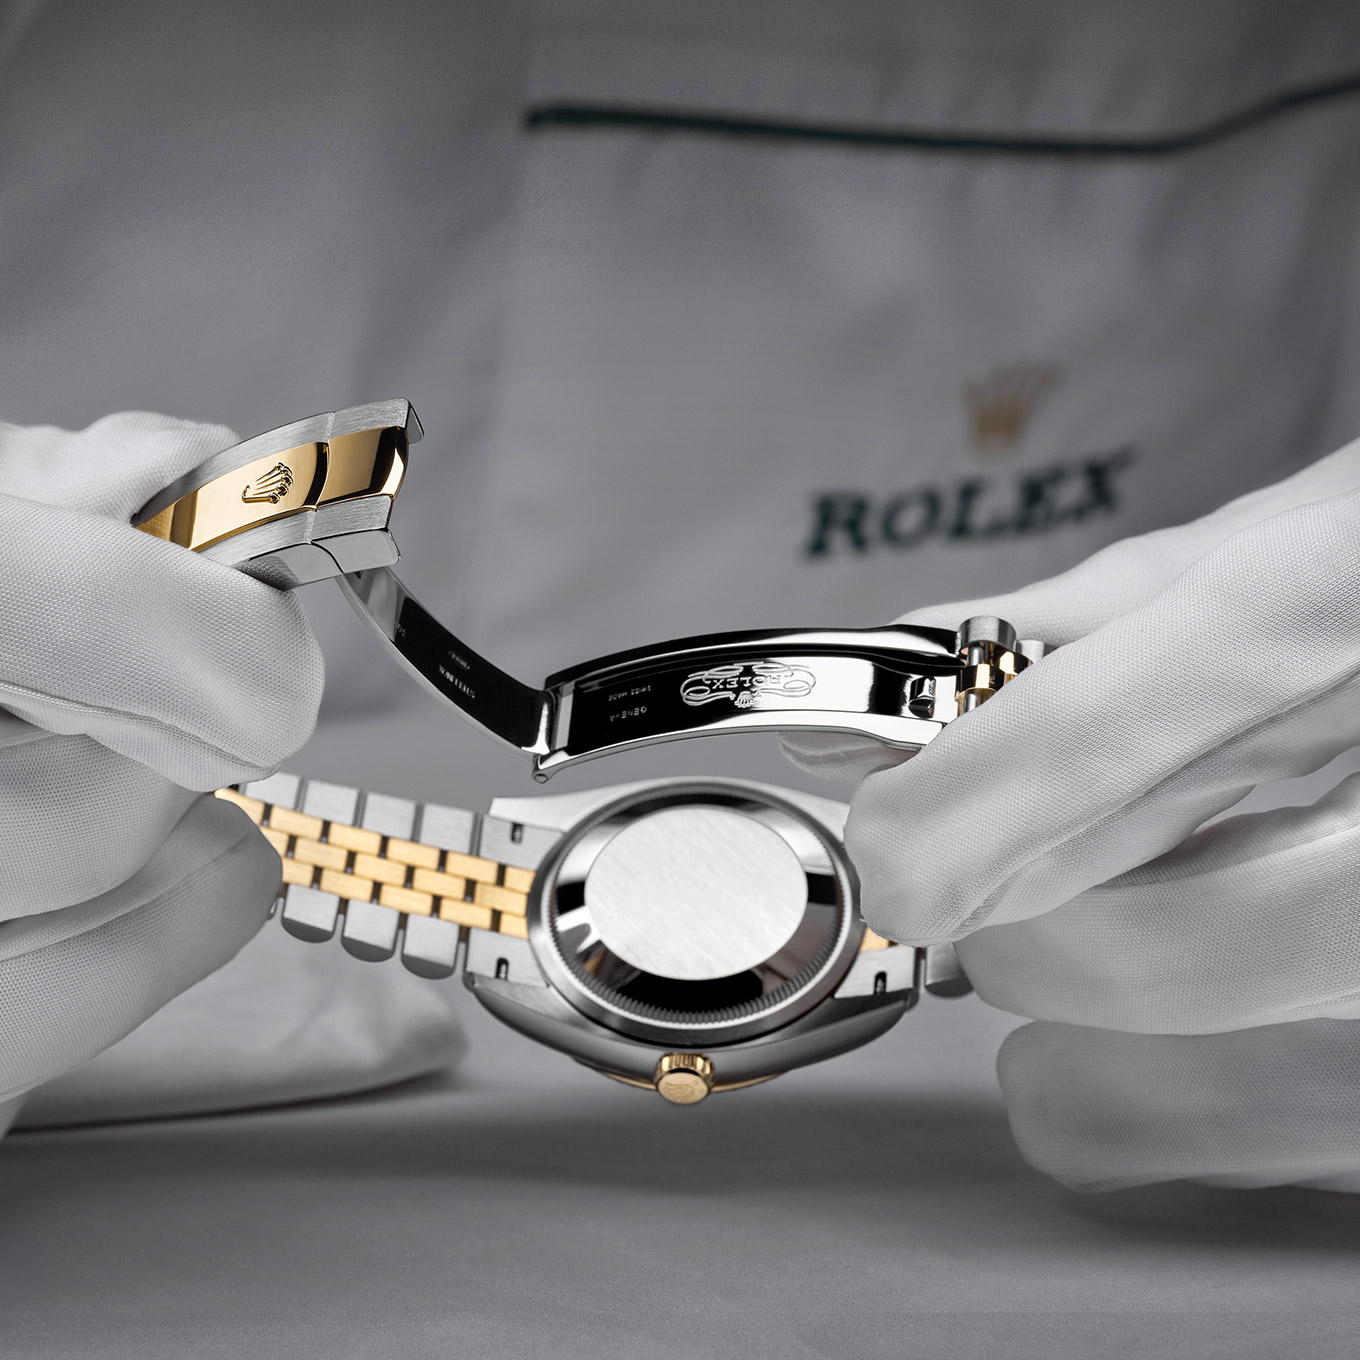 Rolex servicing at Hales Jewelers in Greenville, SC.